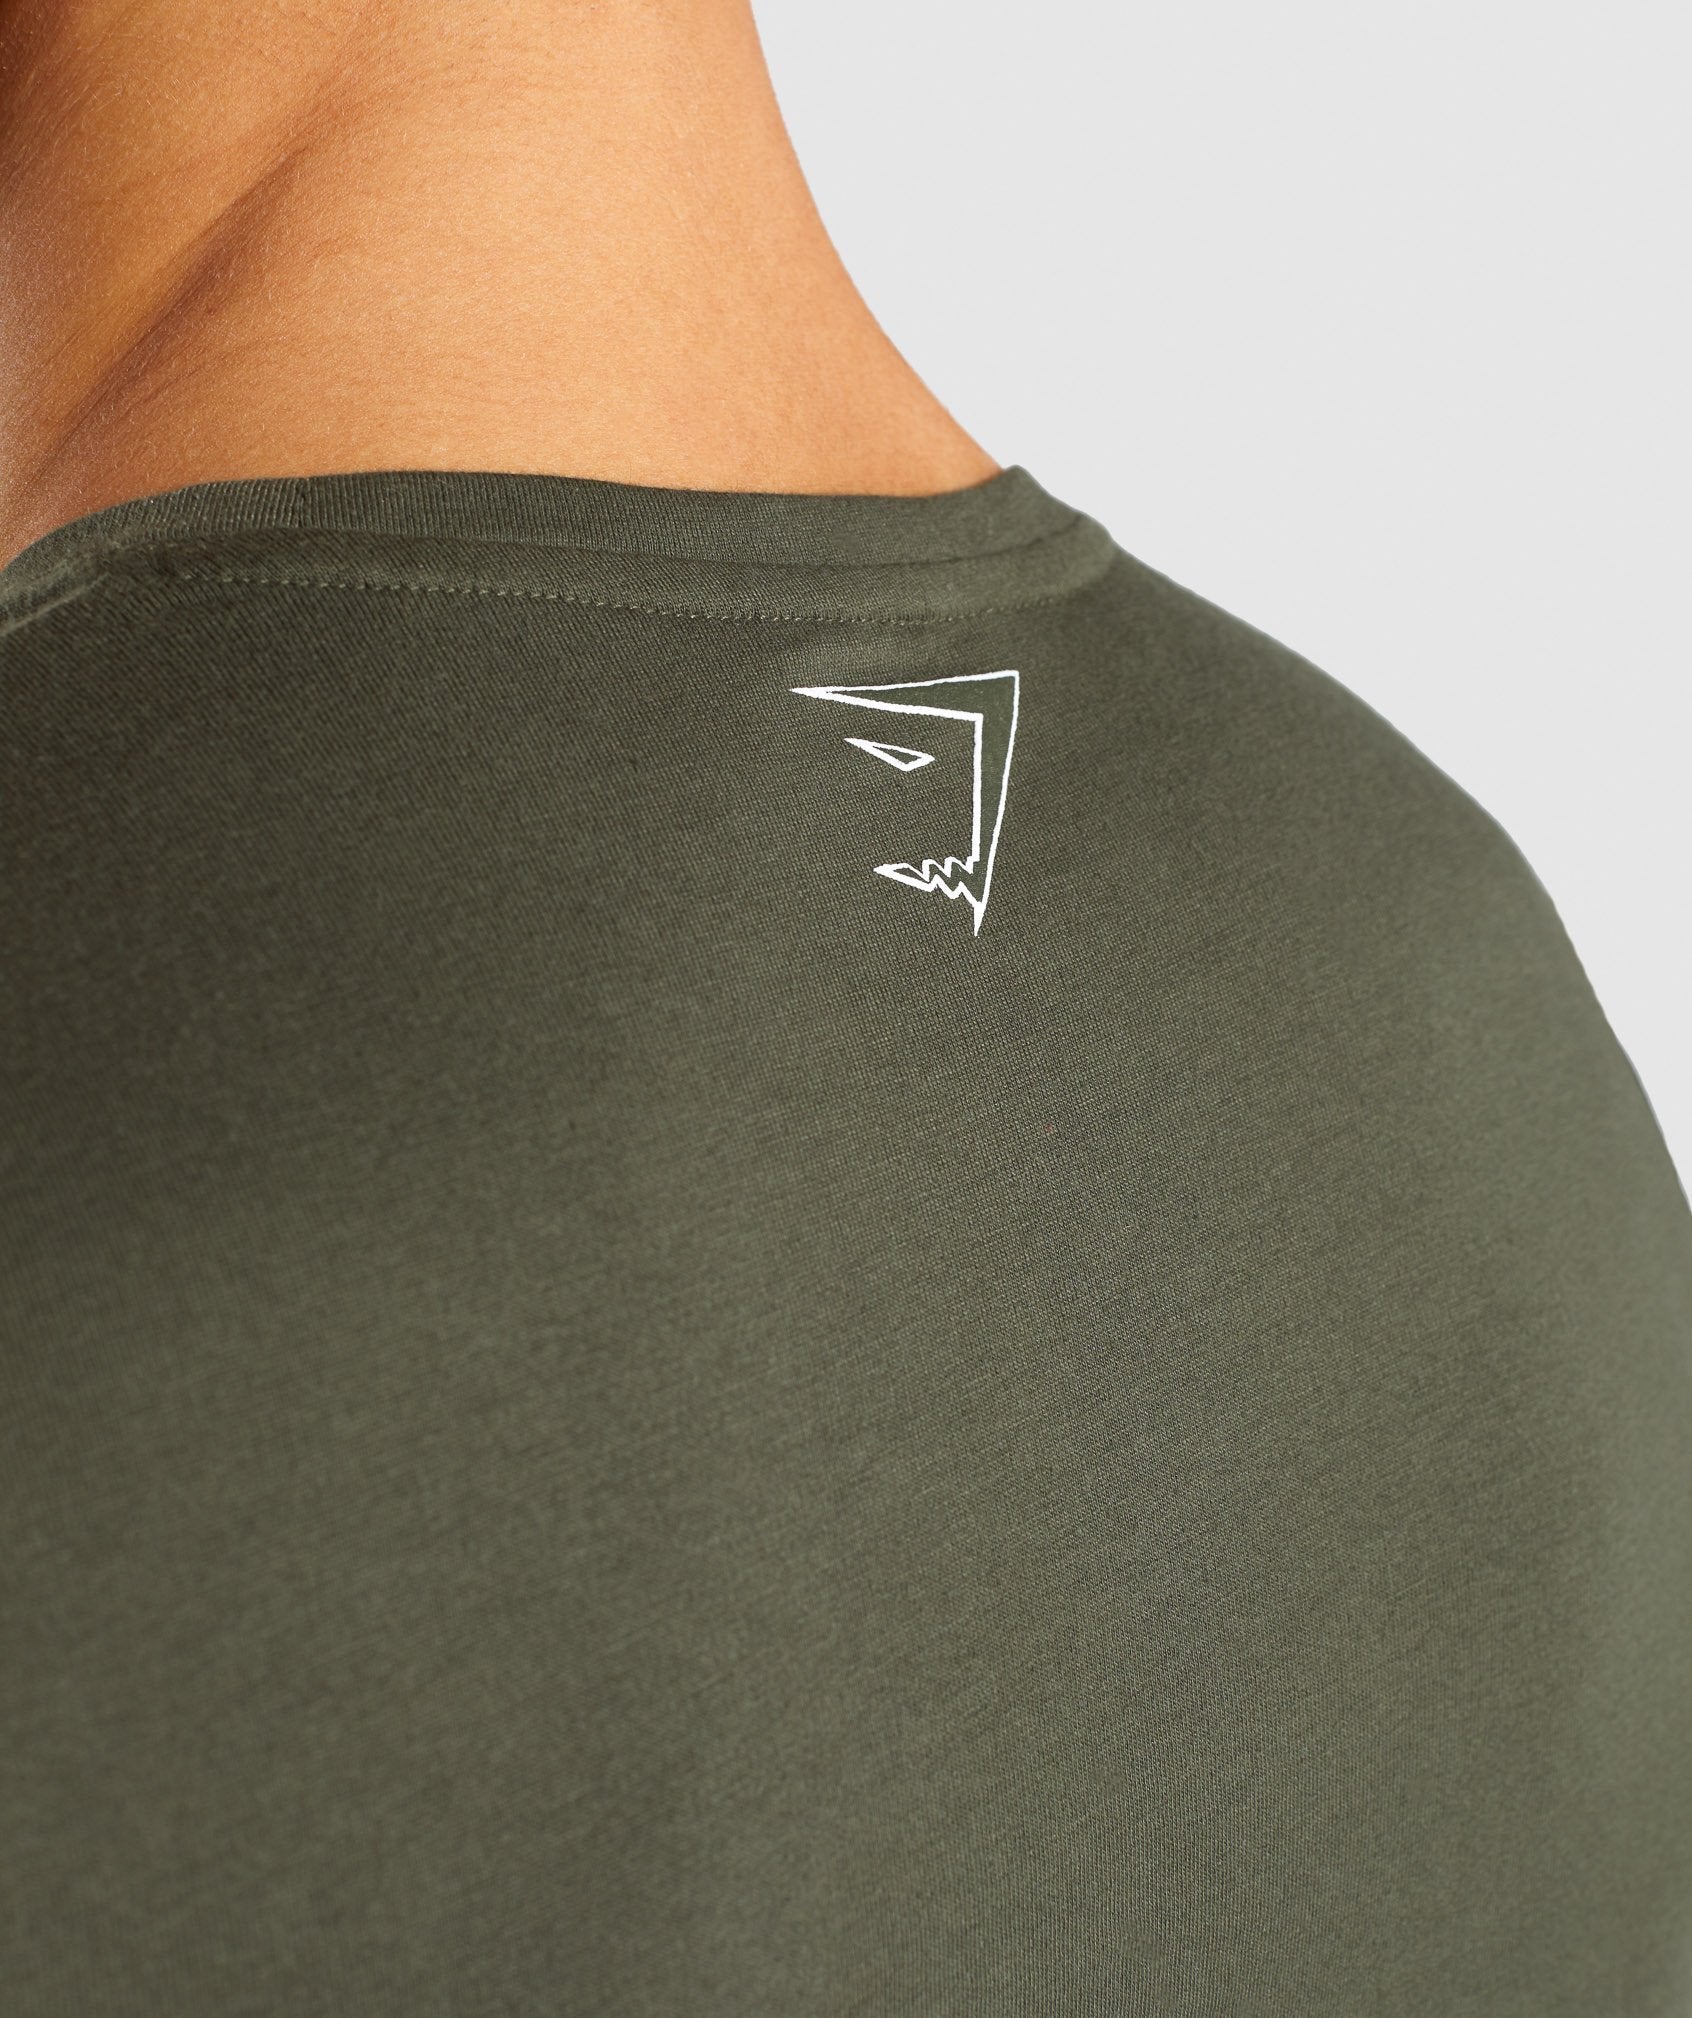 Profile T-Shirt in Woodland Green - view 6